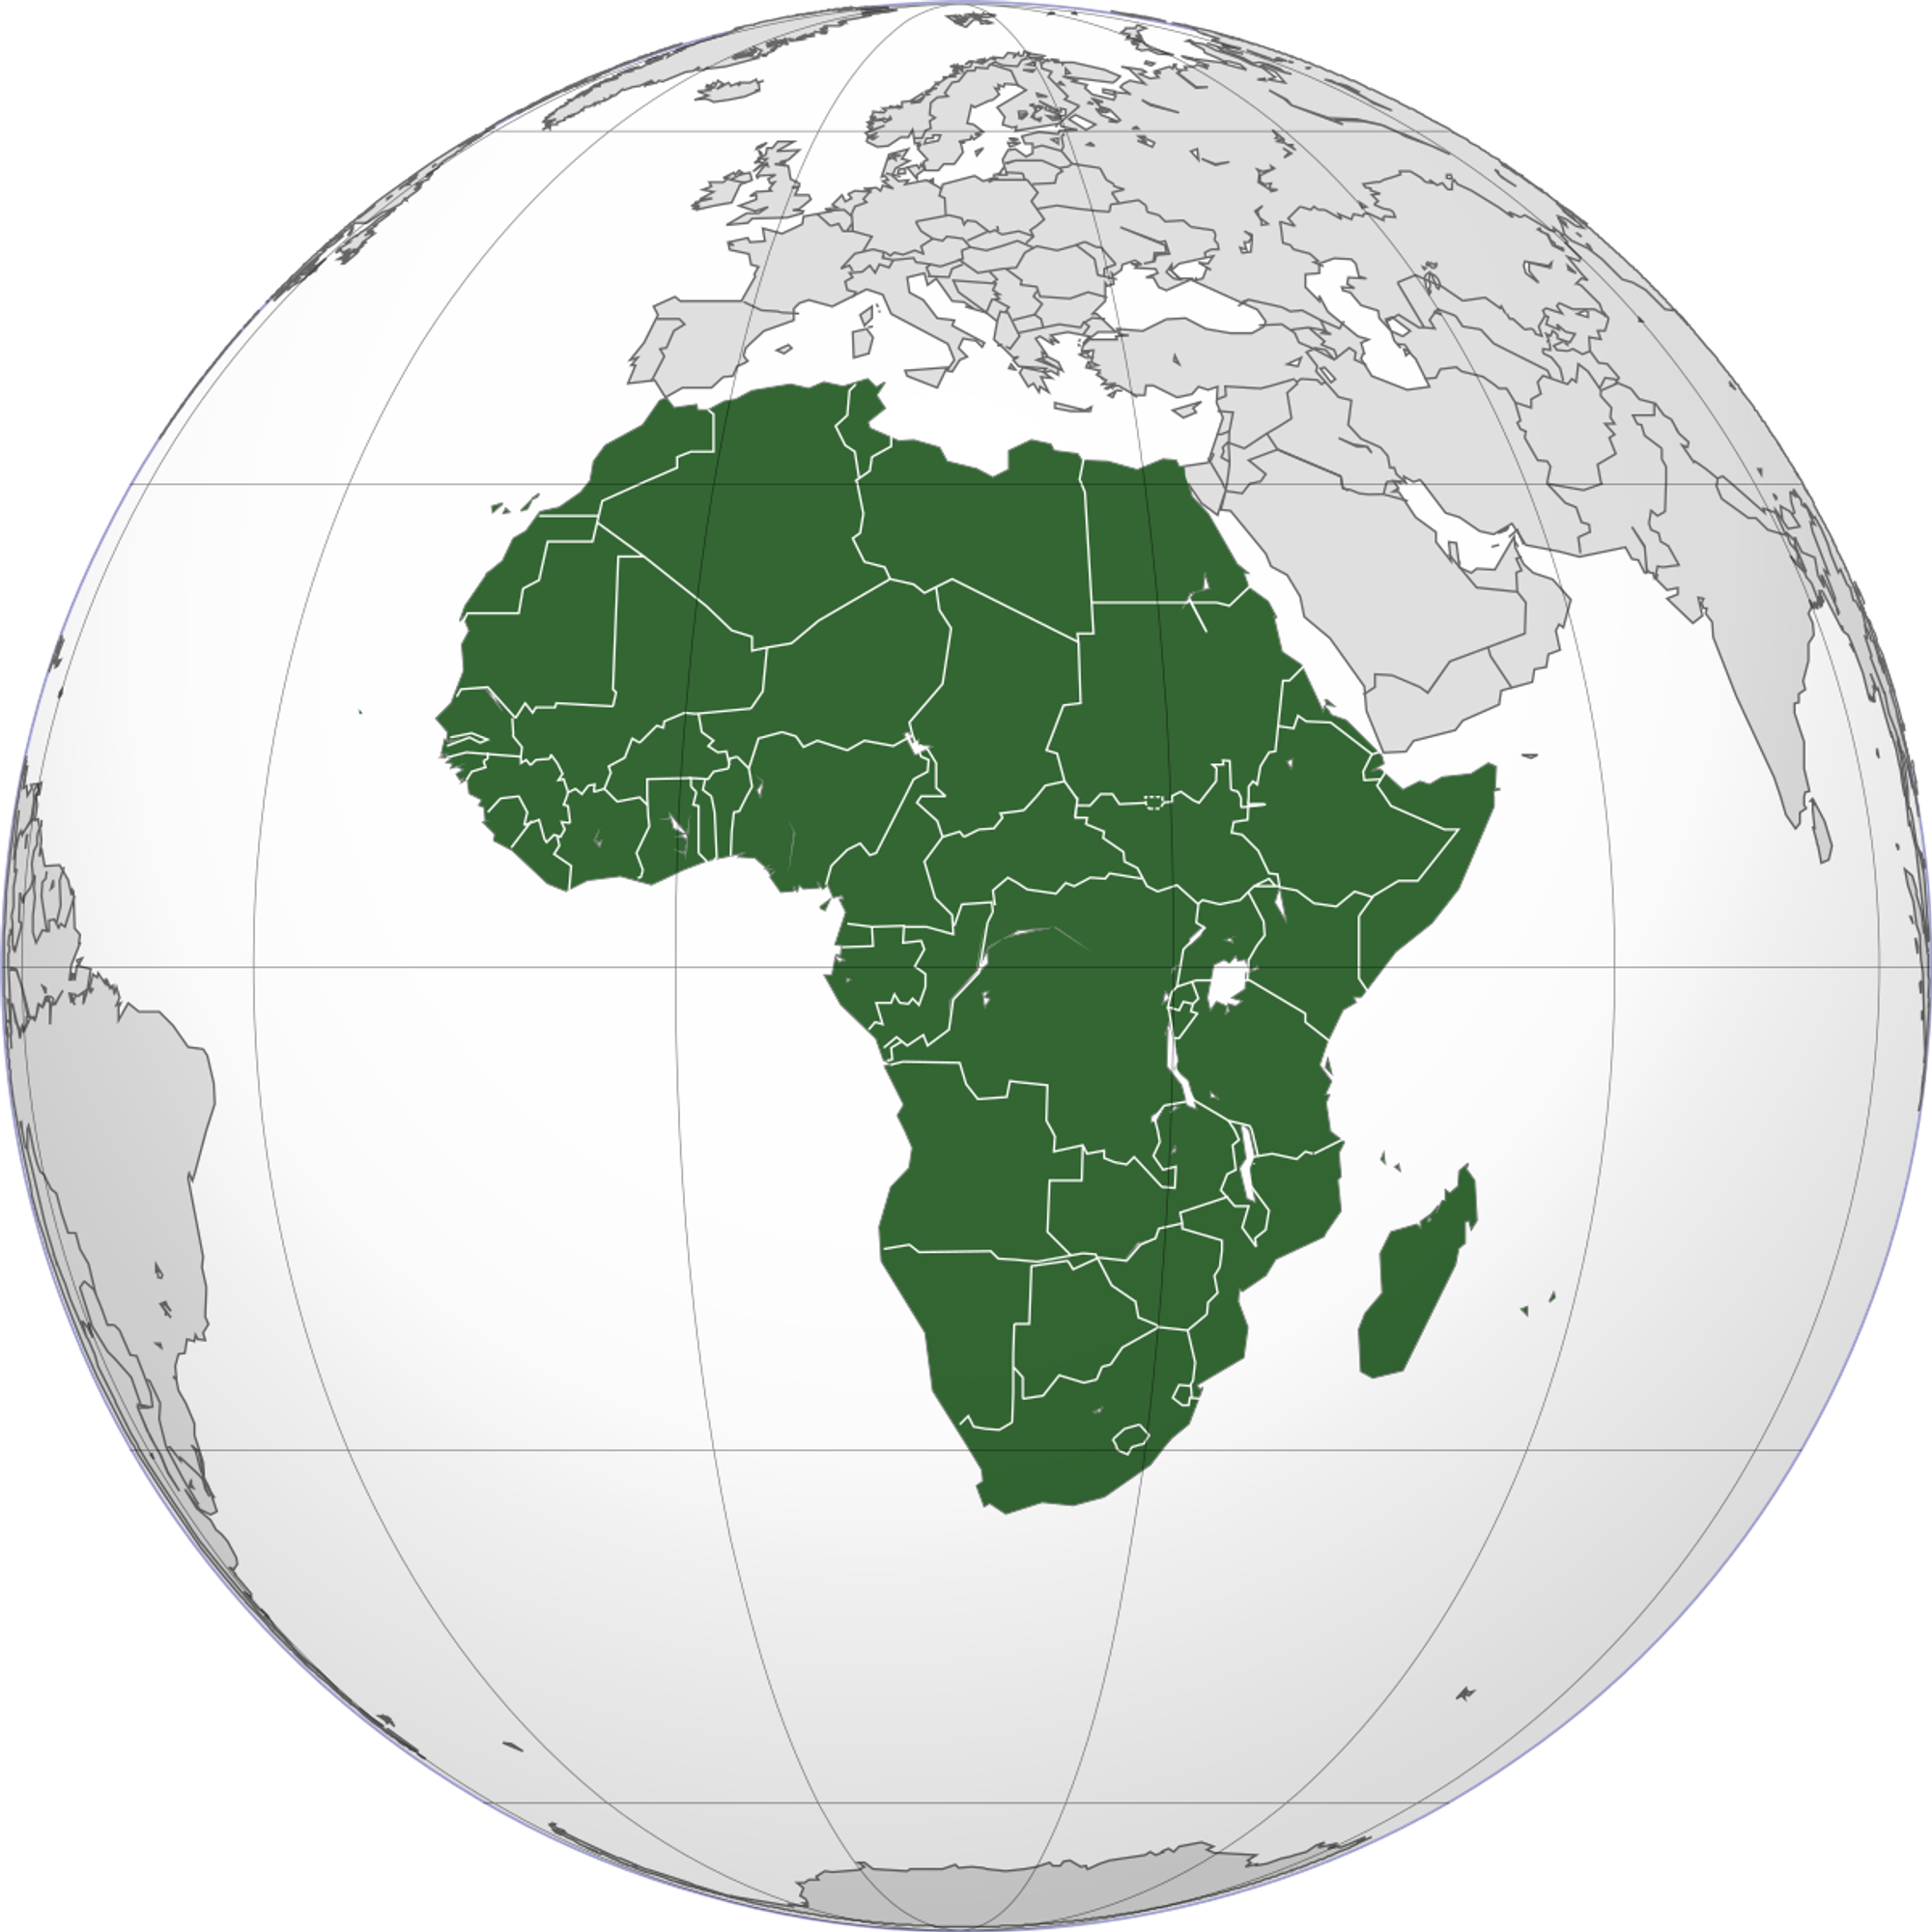 https://upload.wikimedia.org/wikipedia/commons/thumb/8/86/Africa_%28orthographic_projection%29.svg/1200px-Africa_%28orthographic_projection%29.svg.png